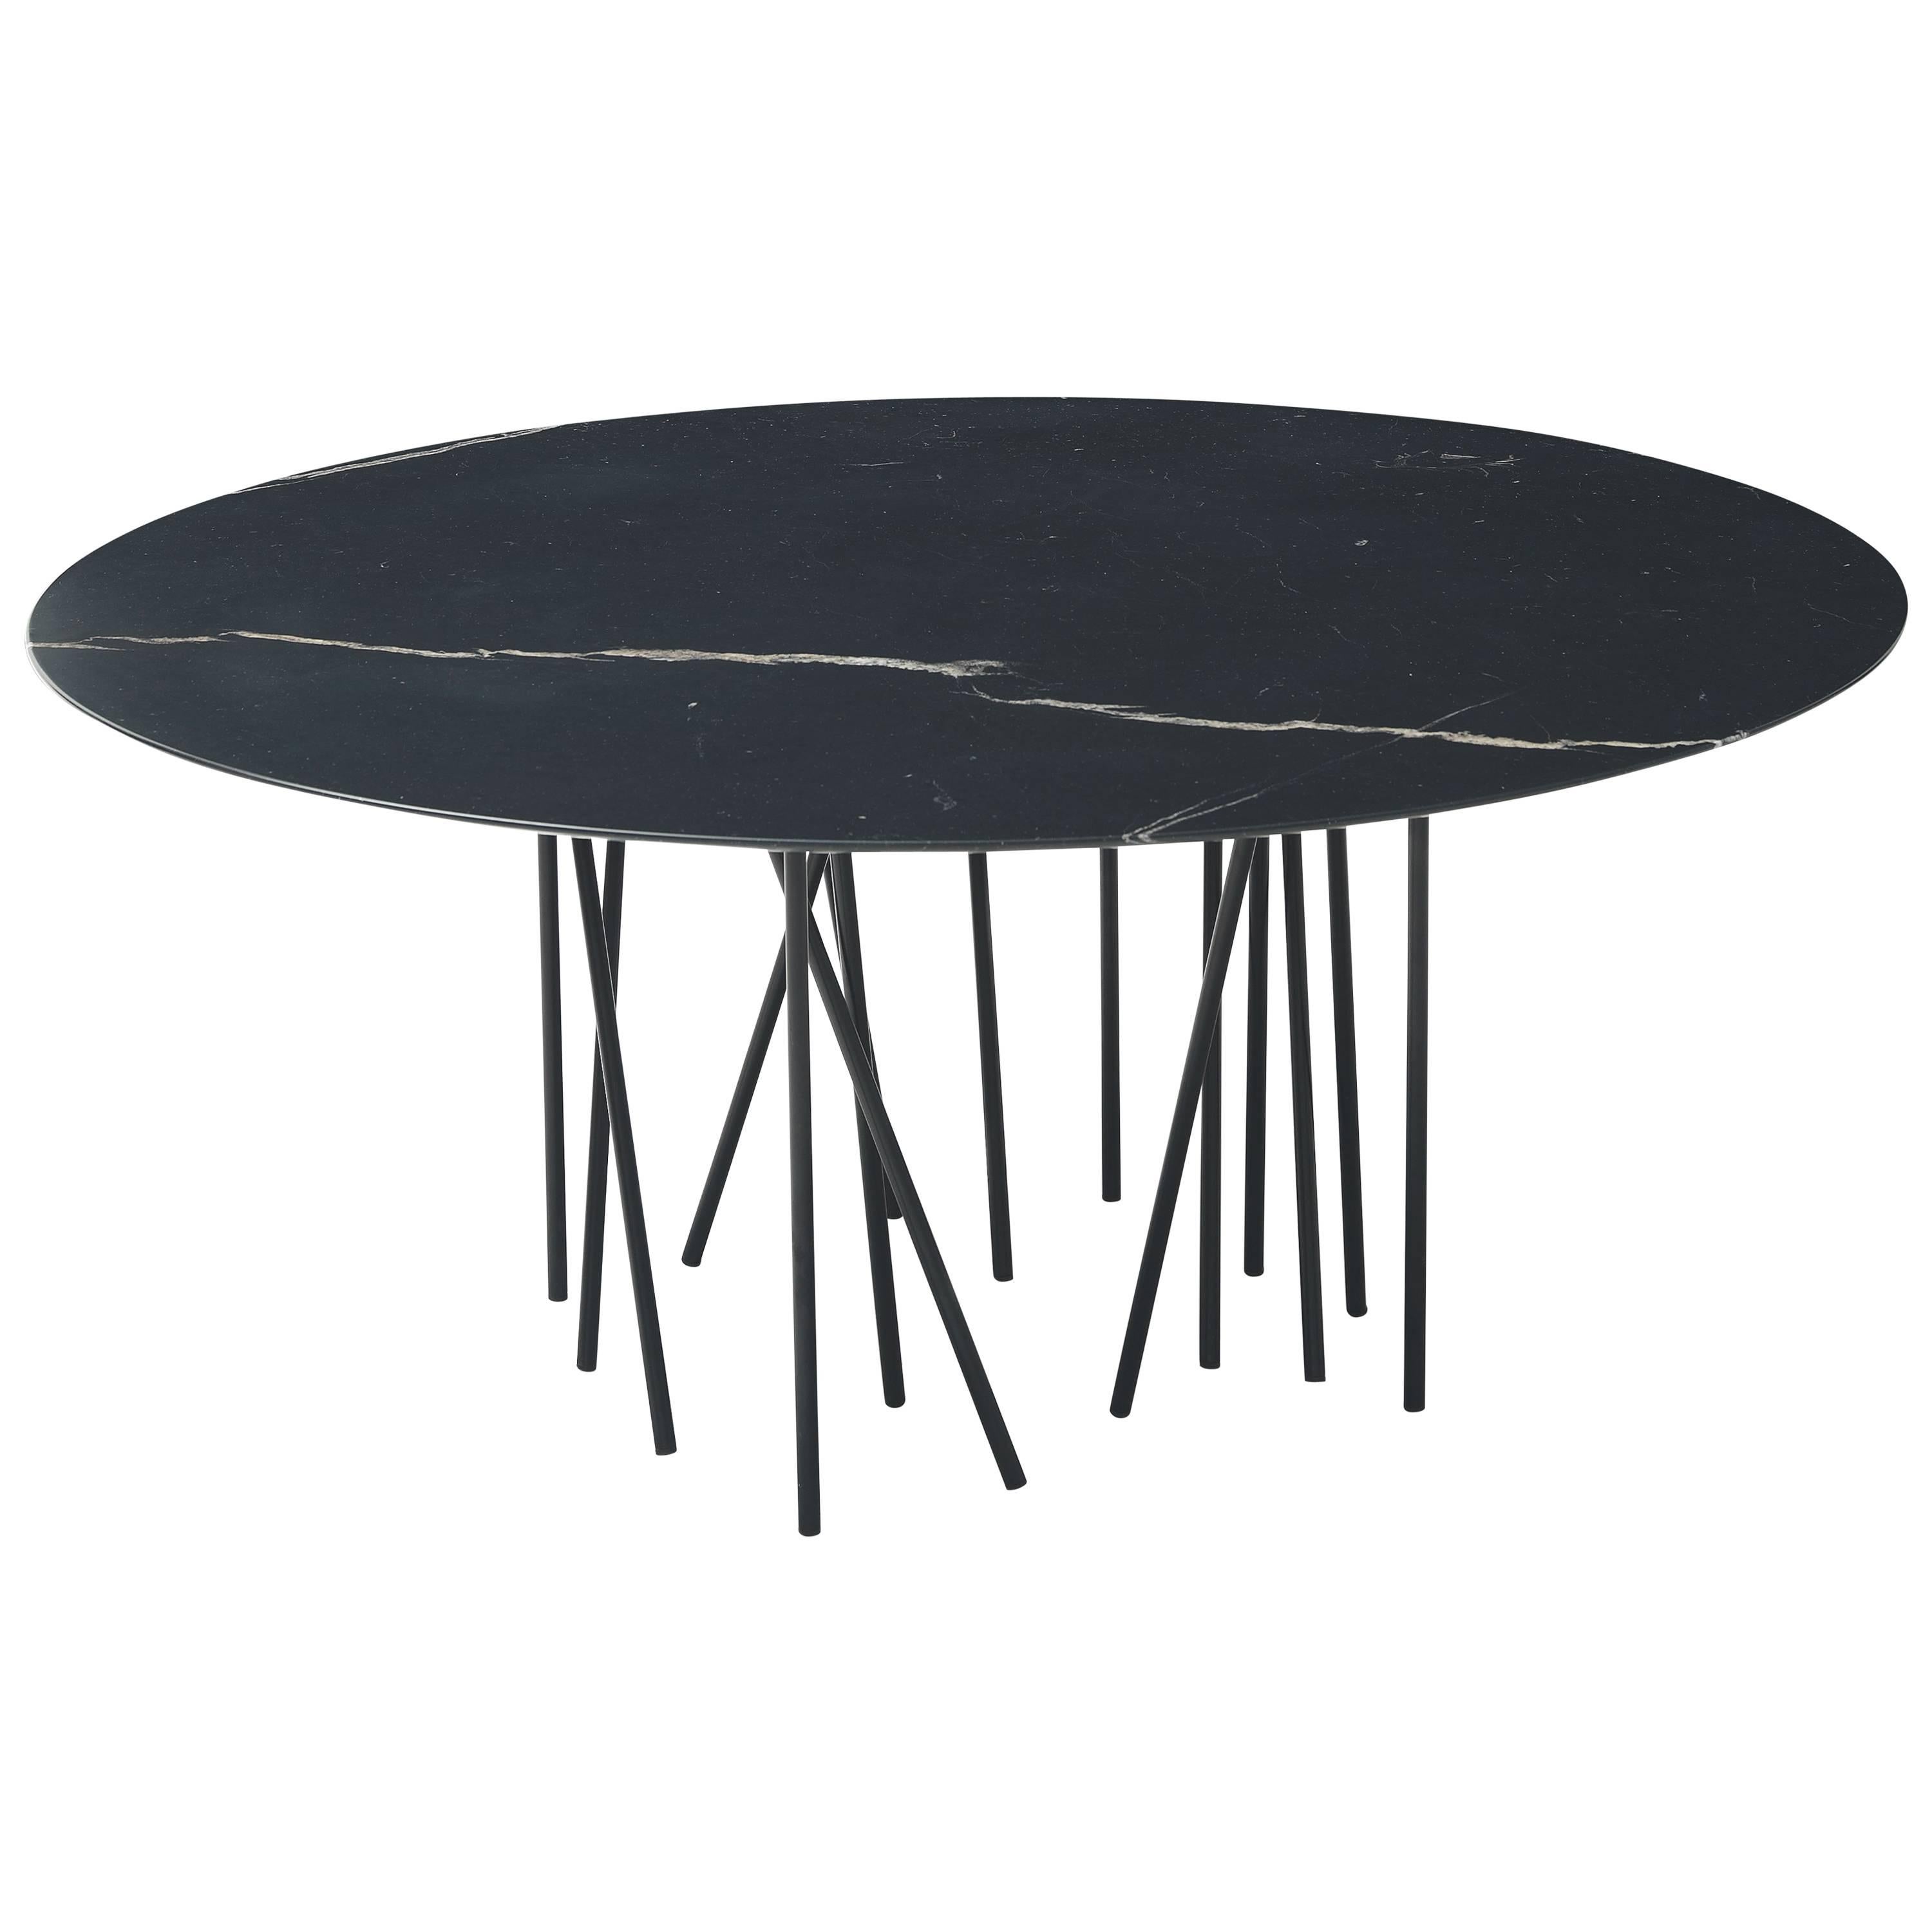 The shape is inspired by the sea creatures, statuesque and sinuous, with tentacles to support the top. It seems to be an improvised table, with a light and minimal look, where the thin stands, apparently posed in a casual way, oppose themselves to